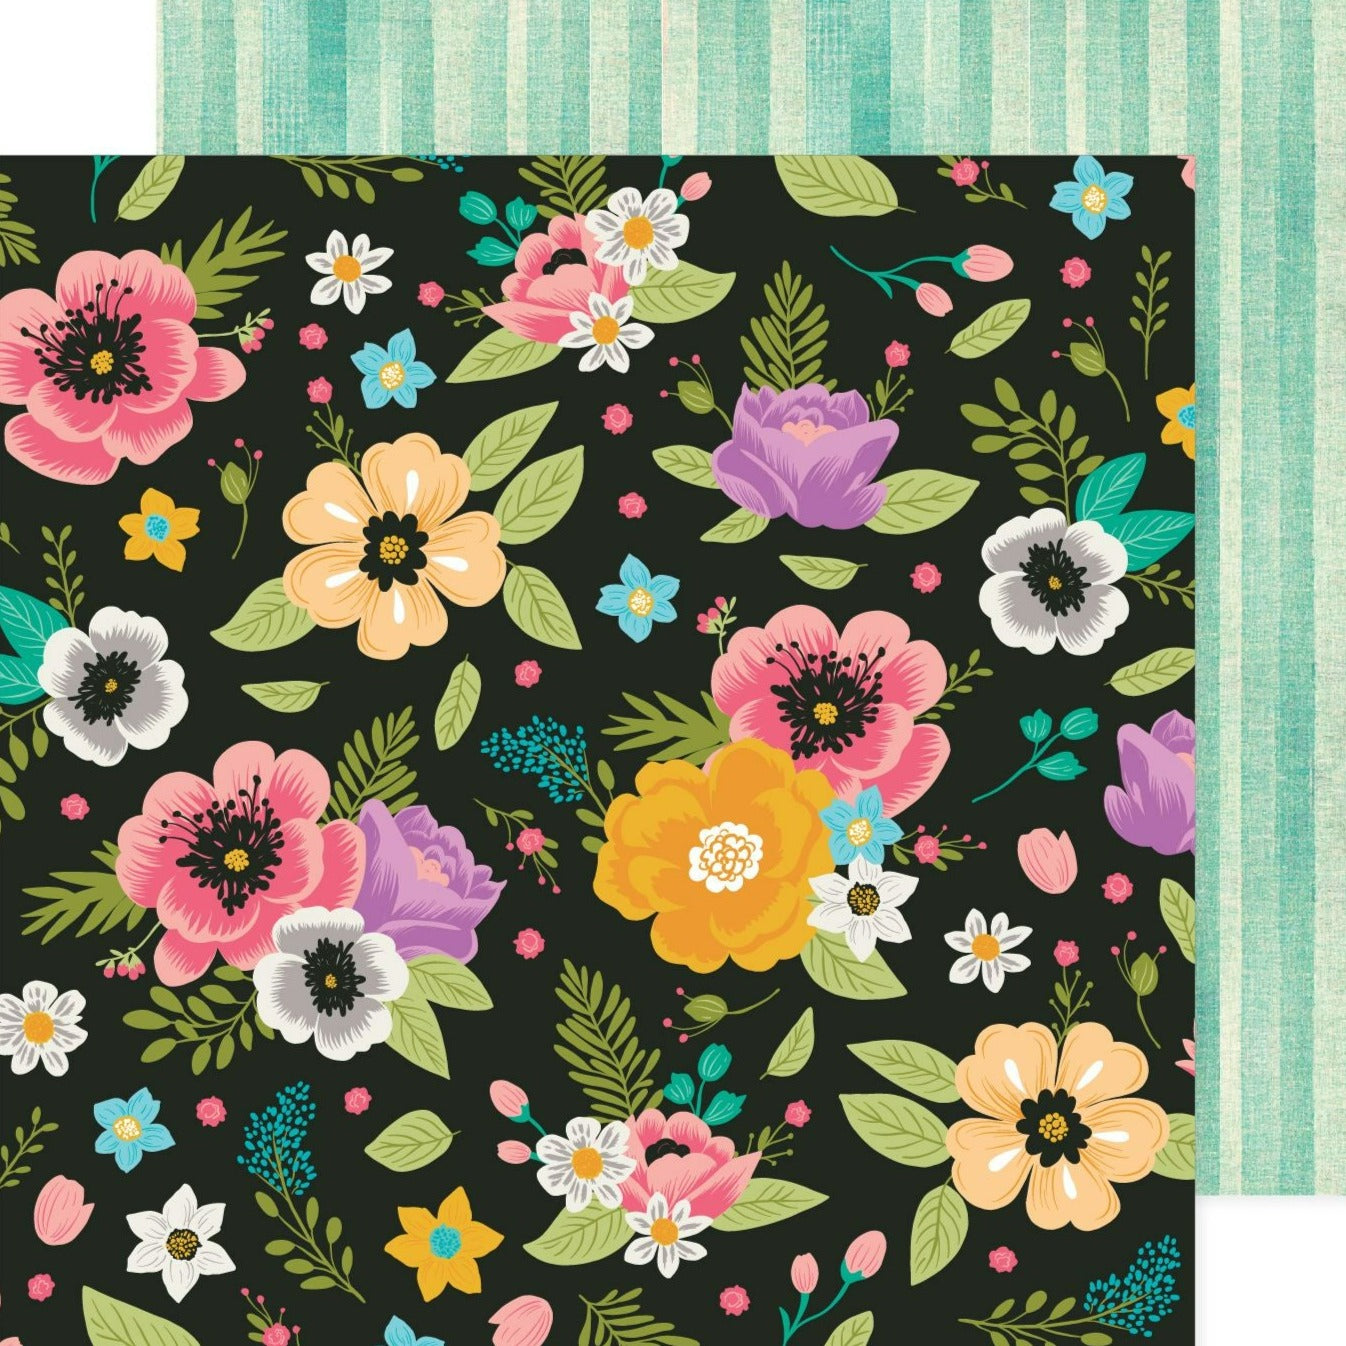 12x12 patterned cardstock. (Side A - bright multi-colored floral with green leaves on a black background, Side B - shades of green verticle lines) - Archival-safe and acid-free from American Crafts